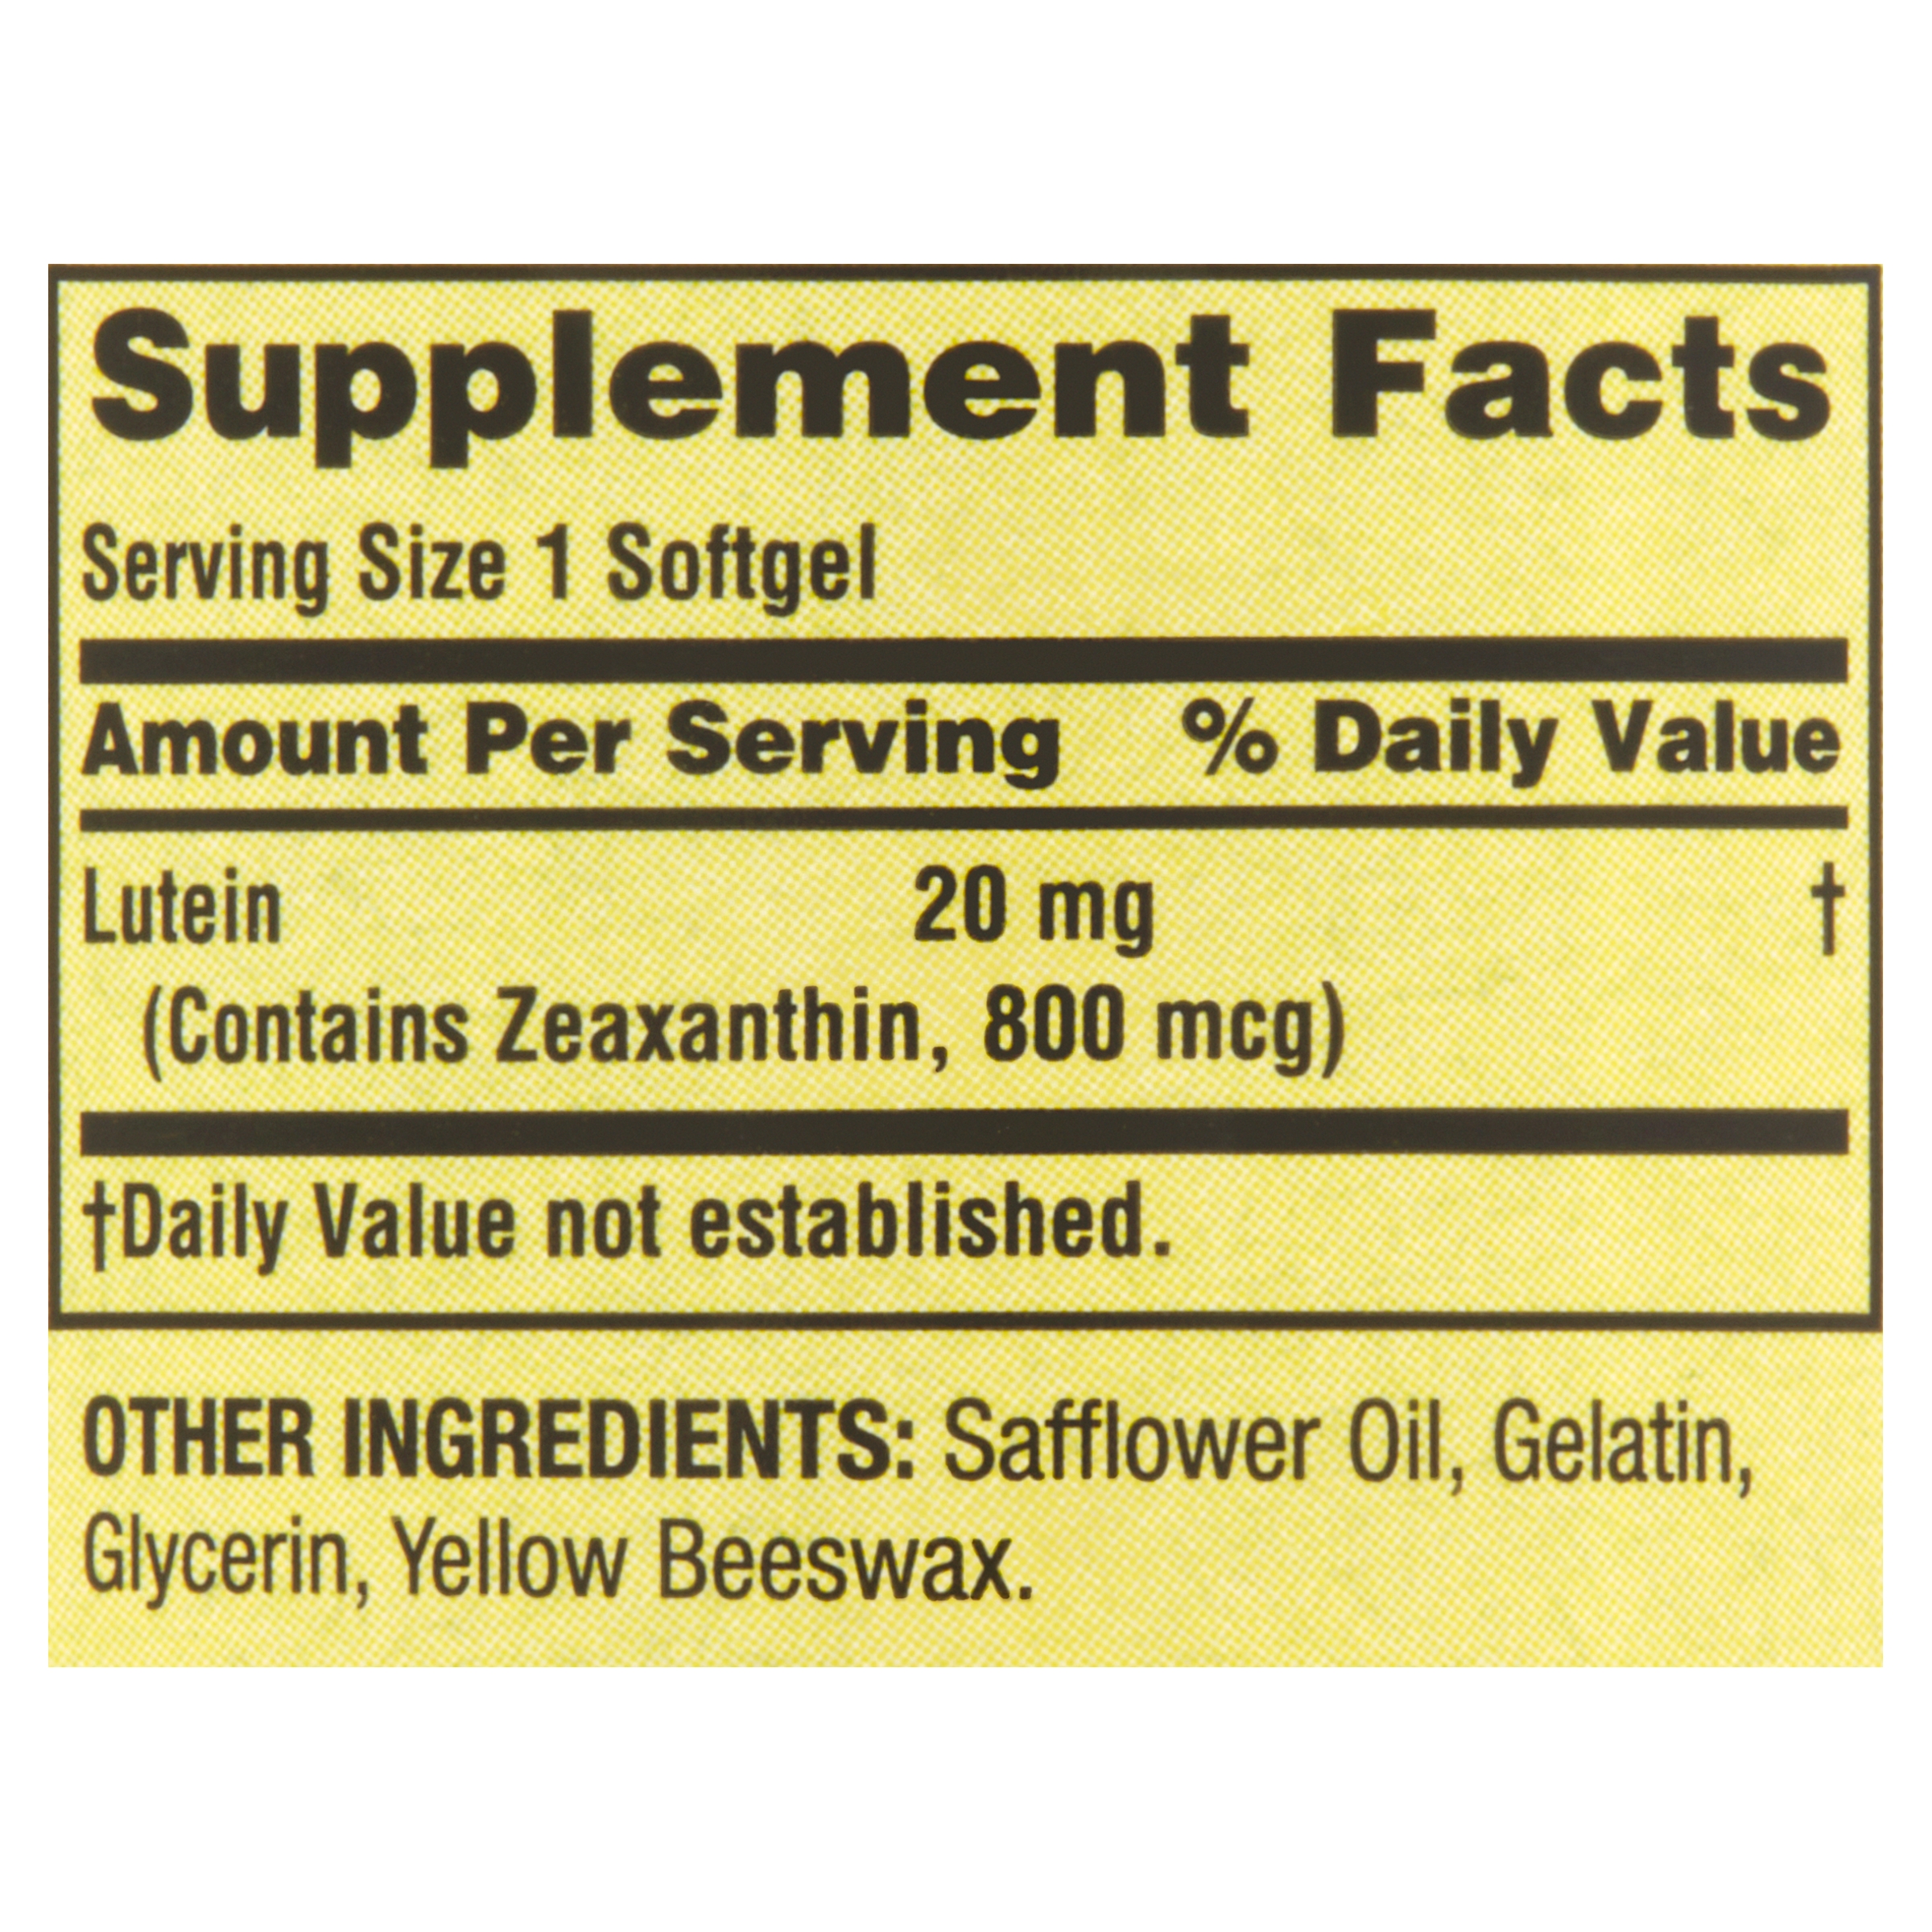 Spring Valley Lutein with Zeaxanthin Dietary Supplement, 20 mg, 30 Count - image 2 of 8